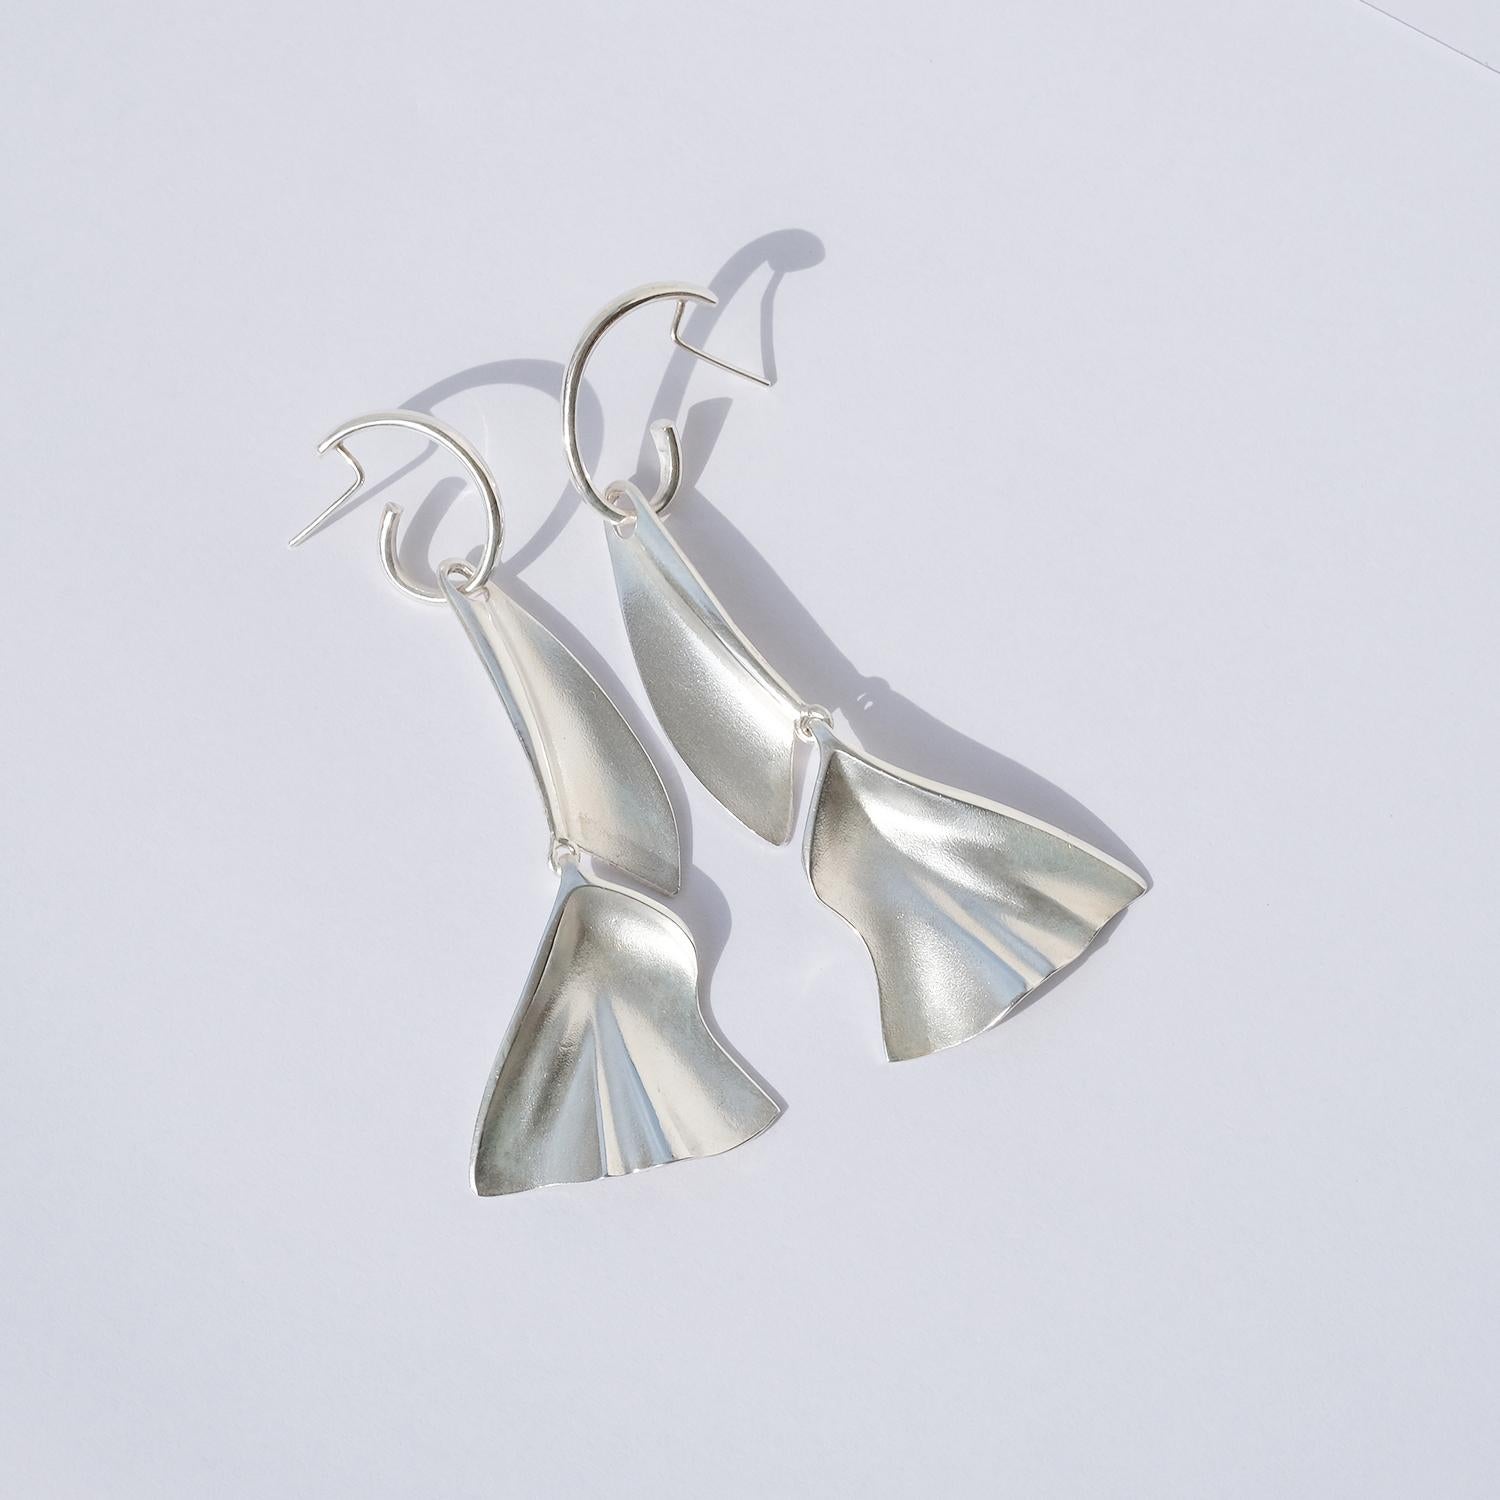 These sterling silver earrings have a brusched, bright and matte surface. The earrings are divided into two parts making them dangle in an appealing way.

The earrings reseamble native american feather earrings, and these versatile pieces can accent